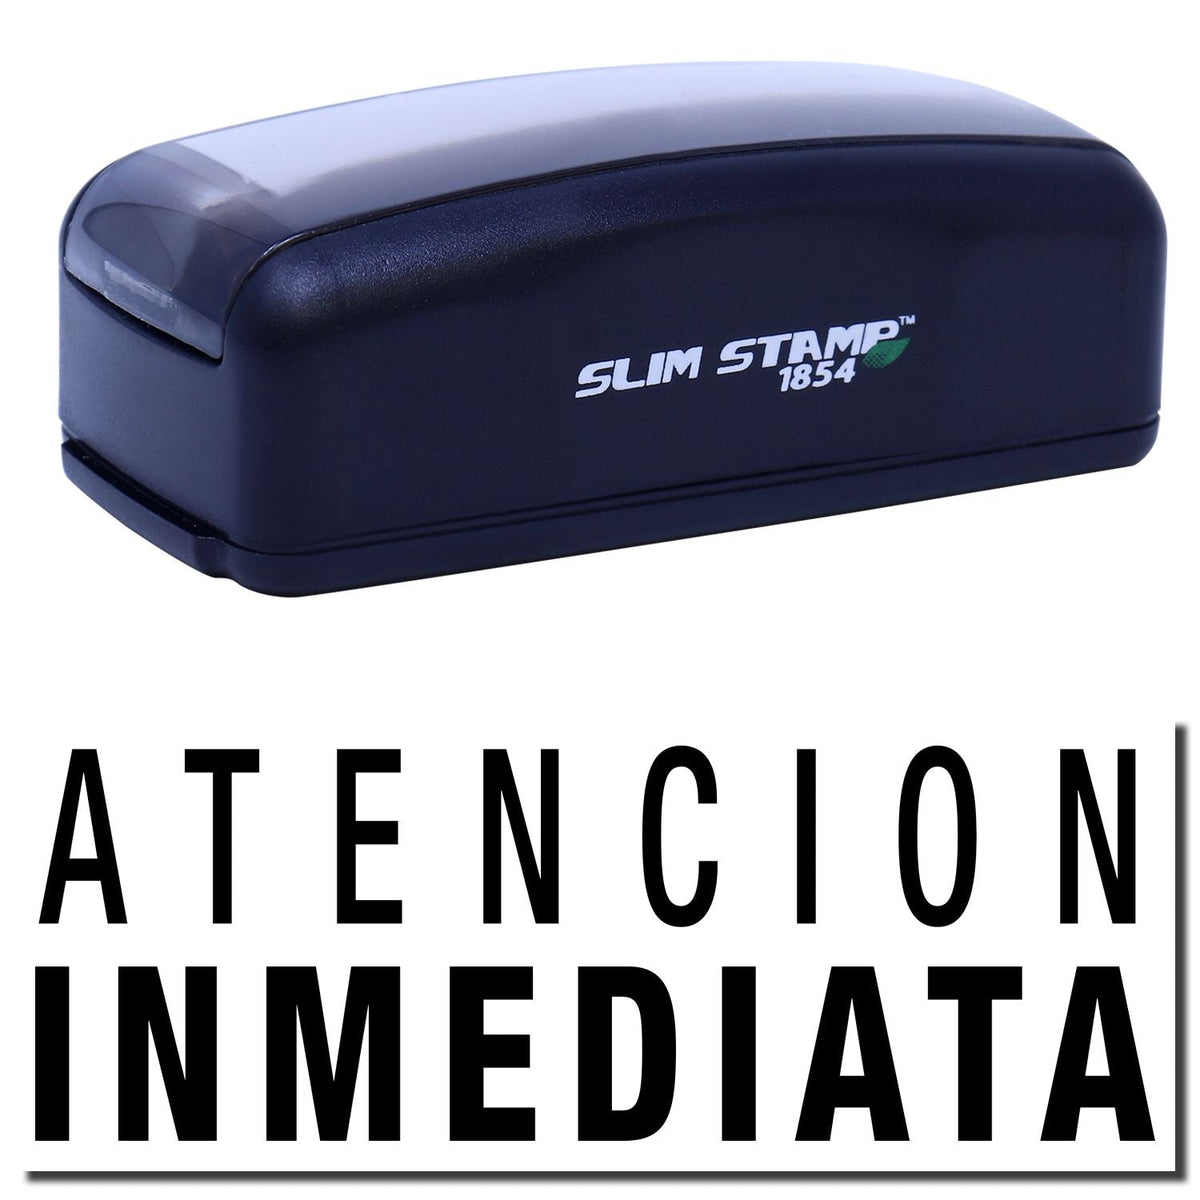 A stock office pre-inked stamp with a stamped image showing how the text &quot;ATENCION INMEDIATA&quot; in a large font is displayed after stamping.